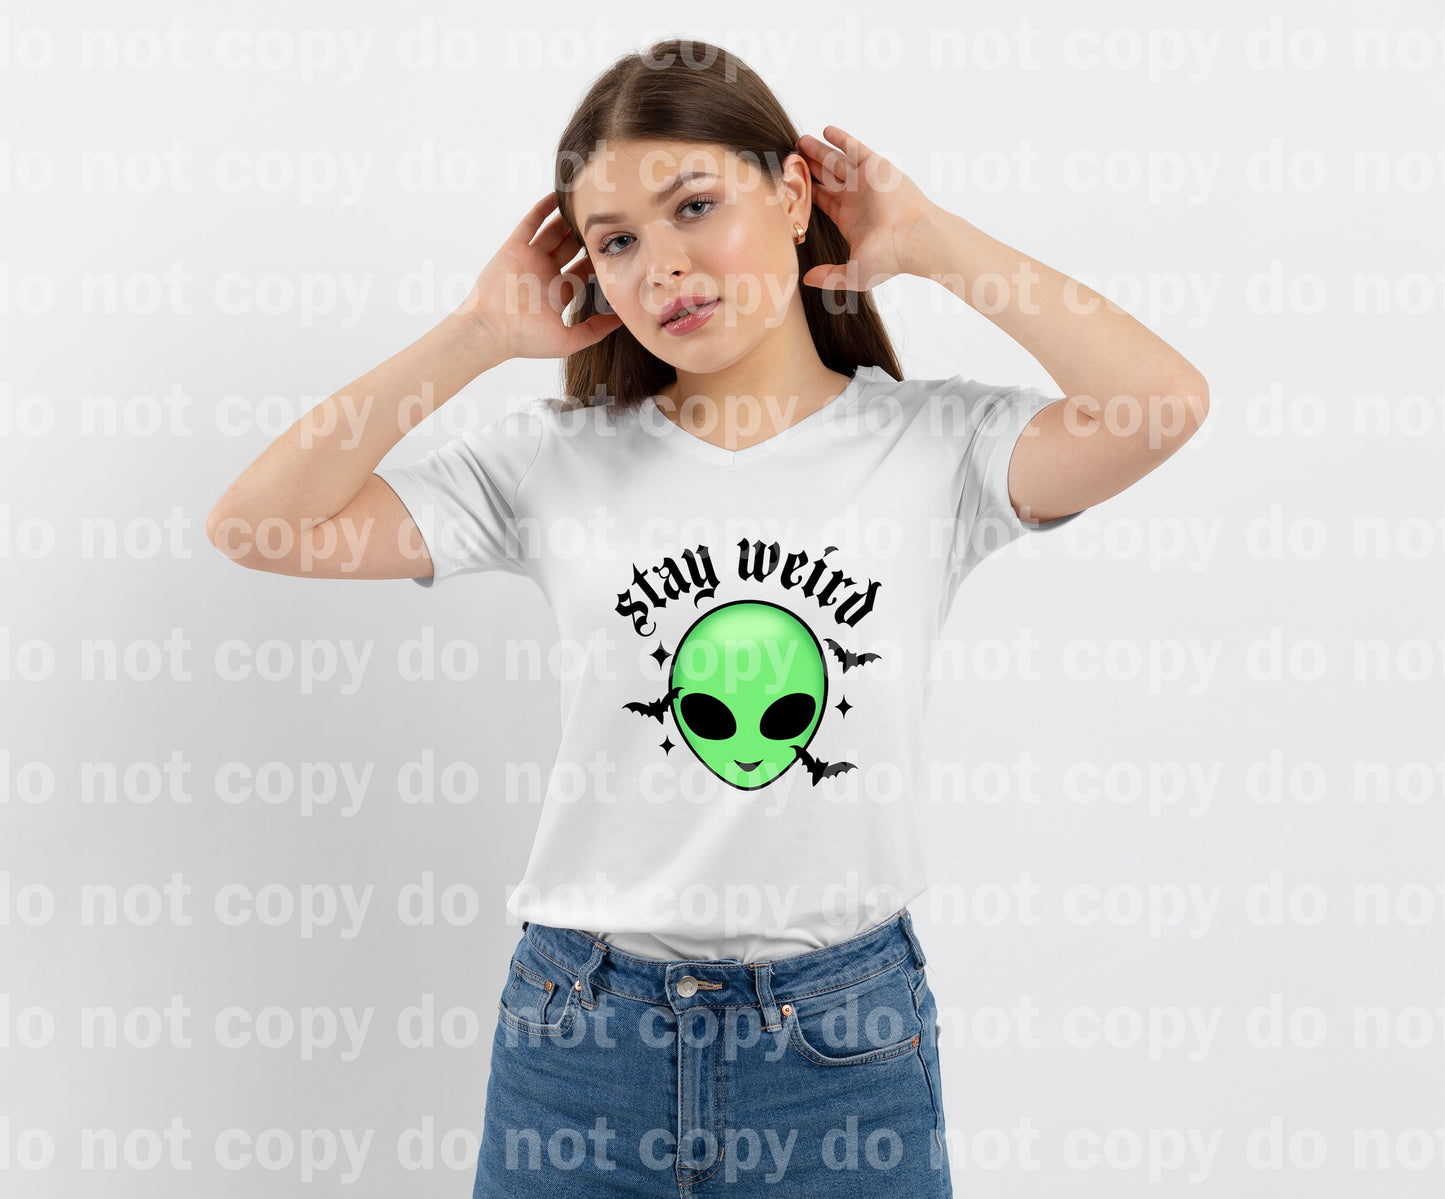 Stay Weird Dream Print or Sublimation Print